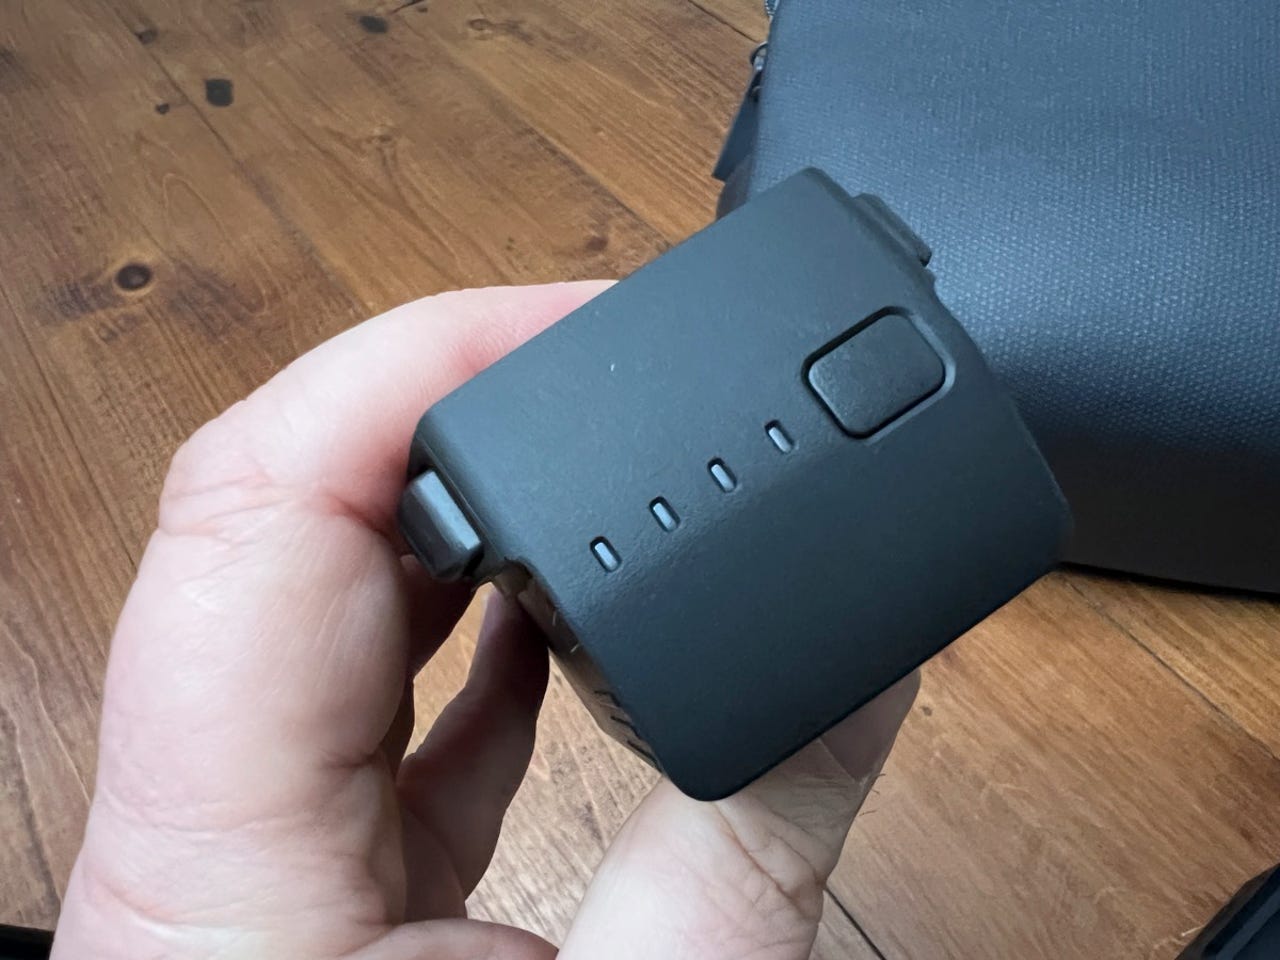 Switch and indicator built into battery